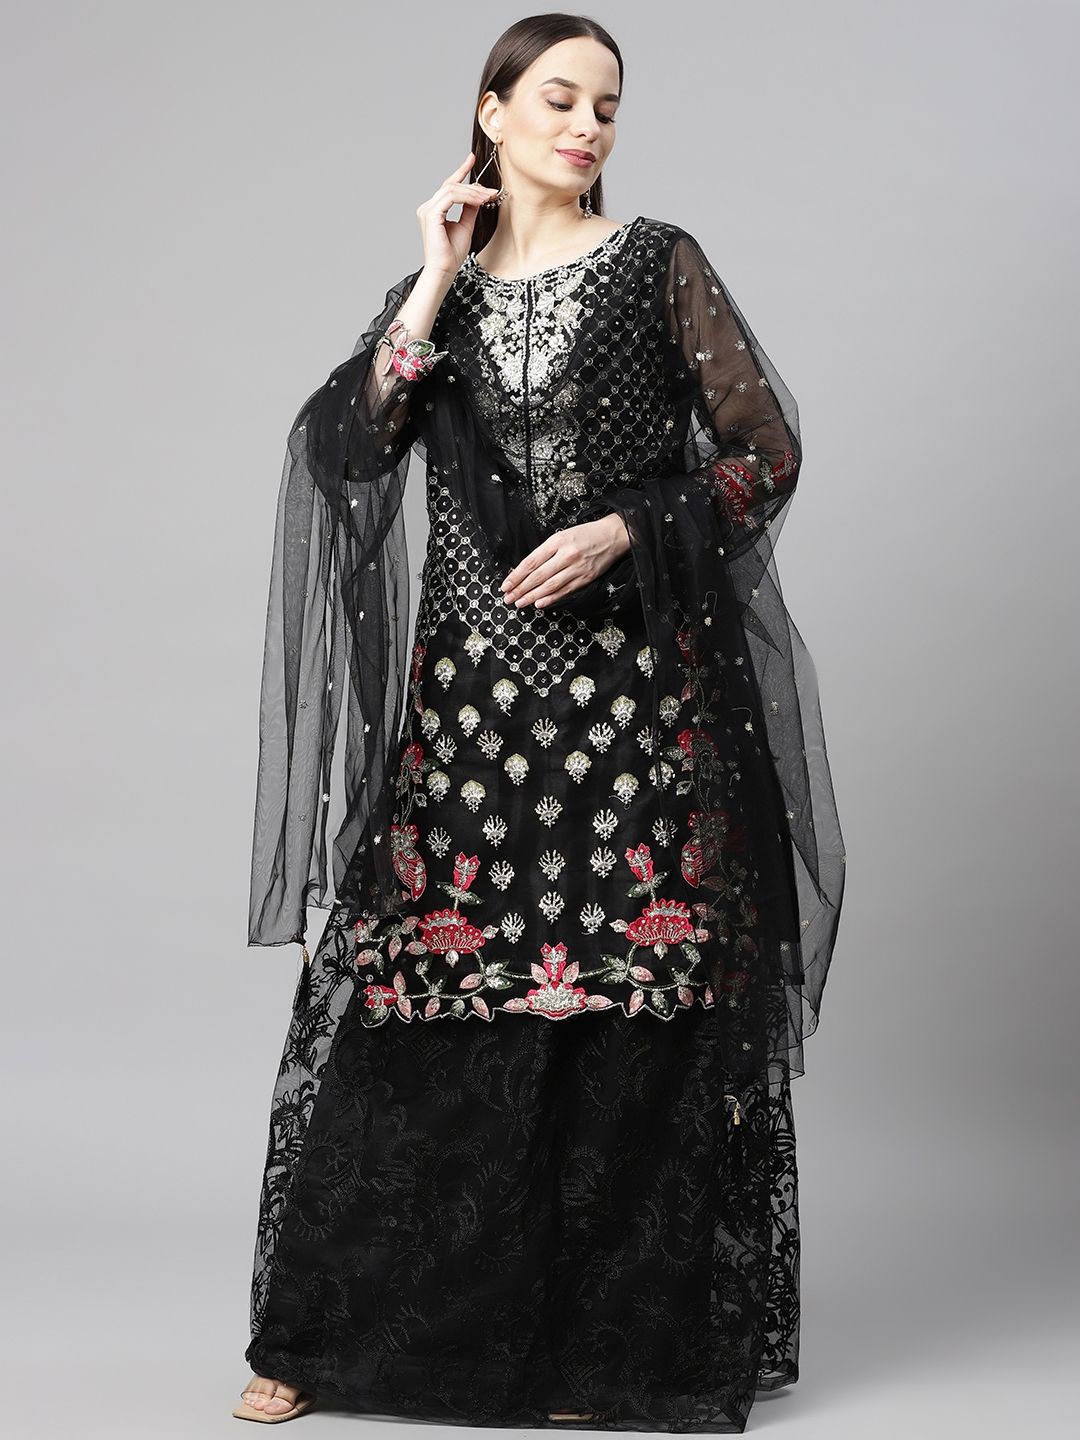 Readiprint Fashions Black Embellished Unstitched Dress Material Price in India